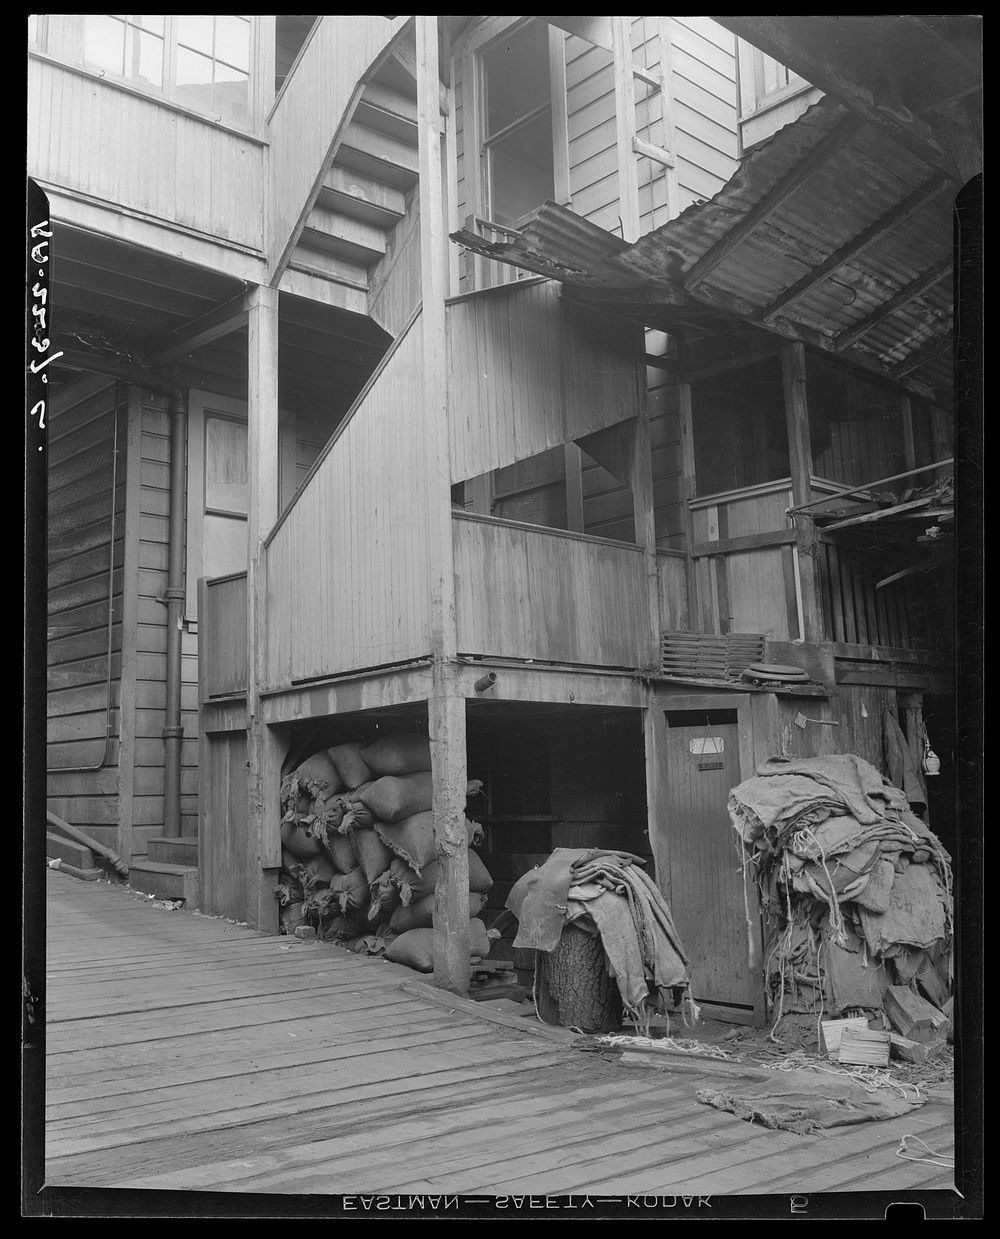 Backyard. North Beach District (Italians). San Francisco, California. Sourced from the Library of Congress.